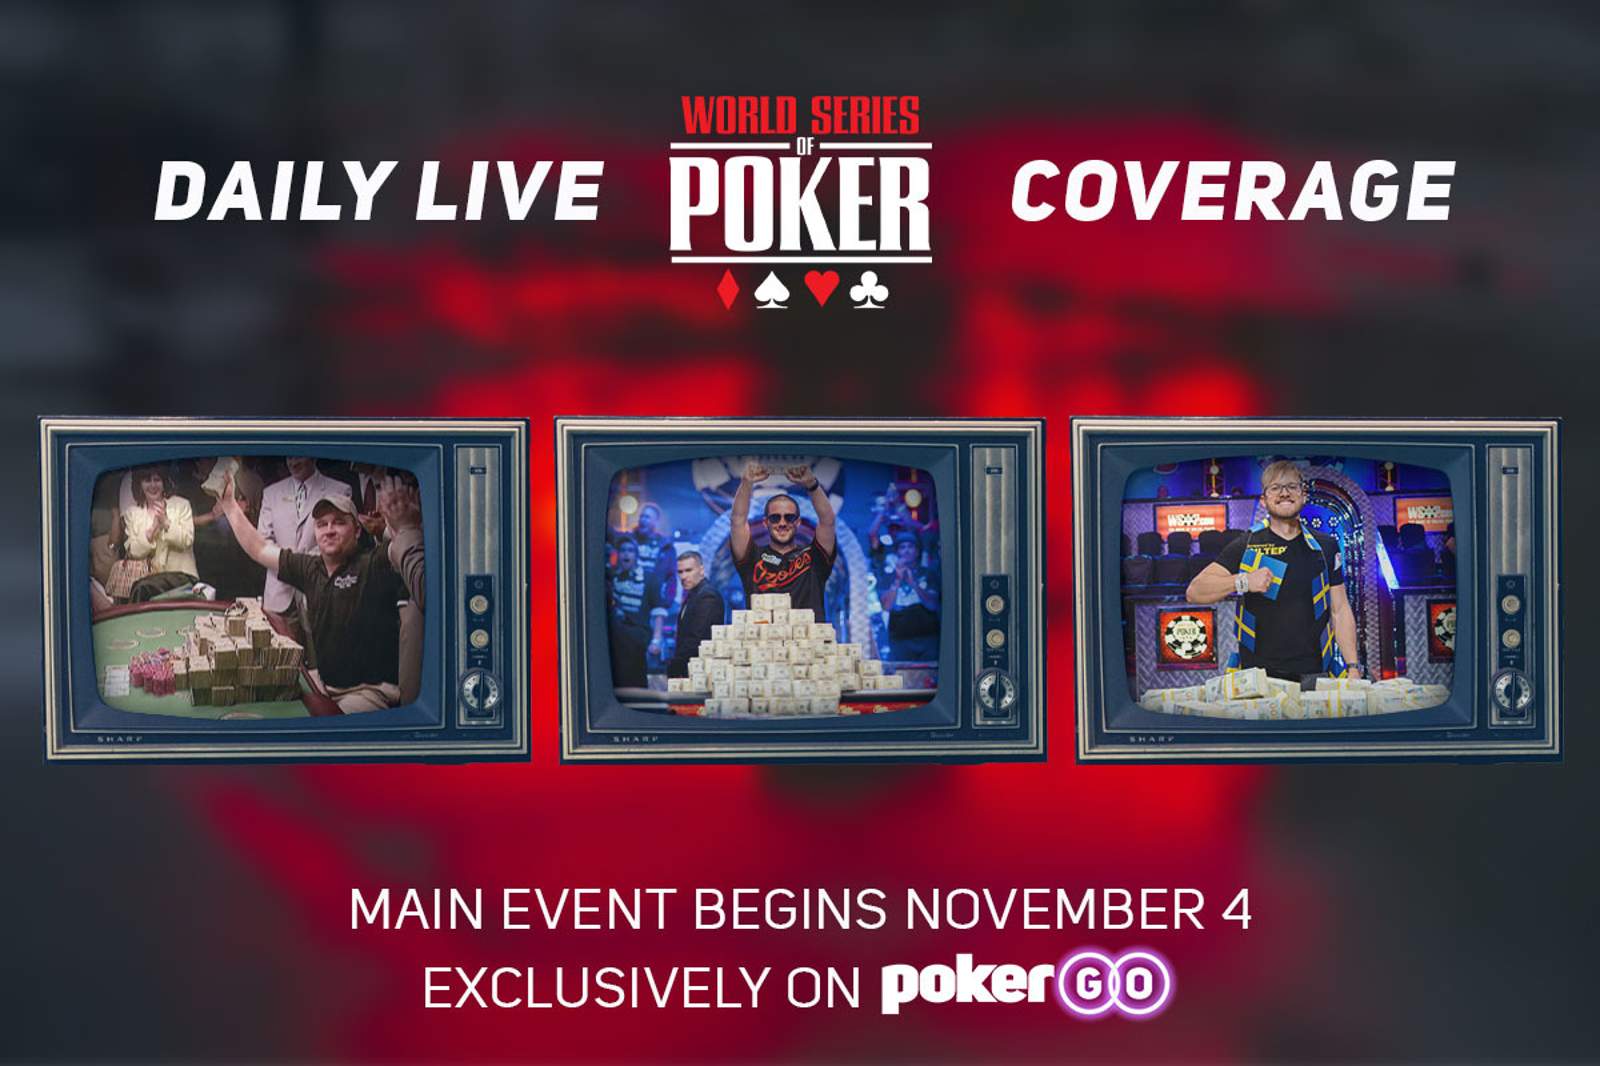 Daily Live Coverage of the 2021 WSOP Main Event Starts Thursday Exclusively On PokerGO®